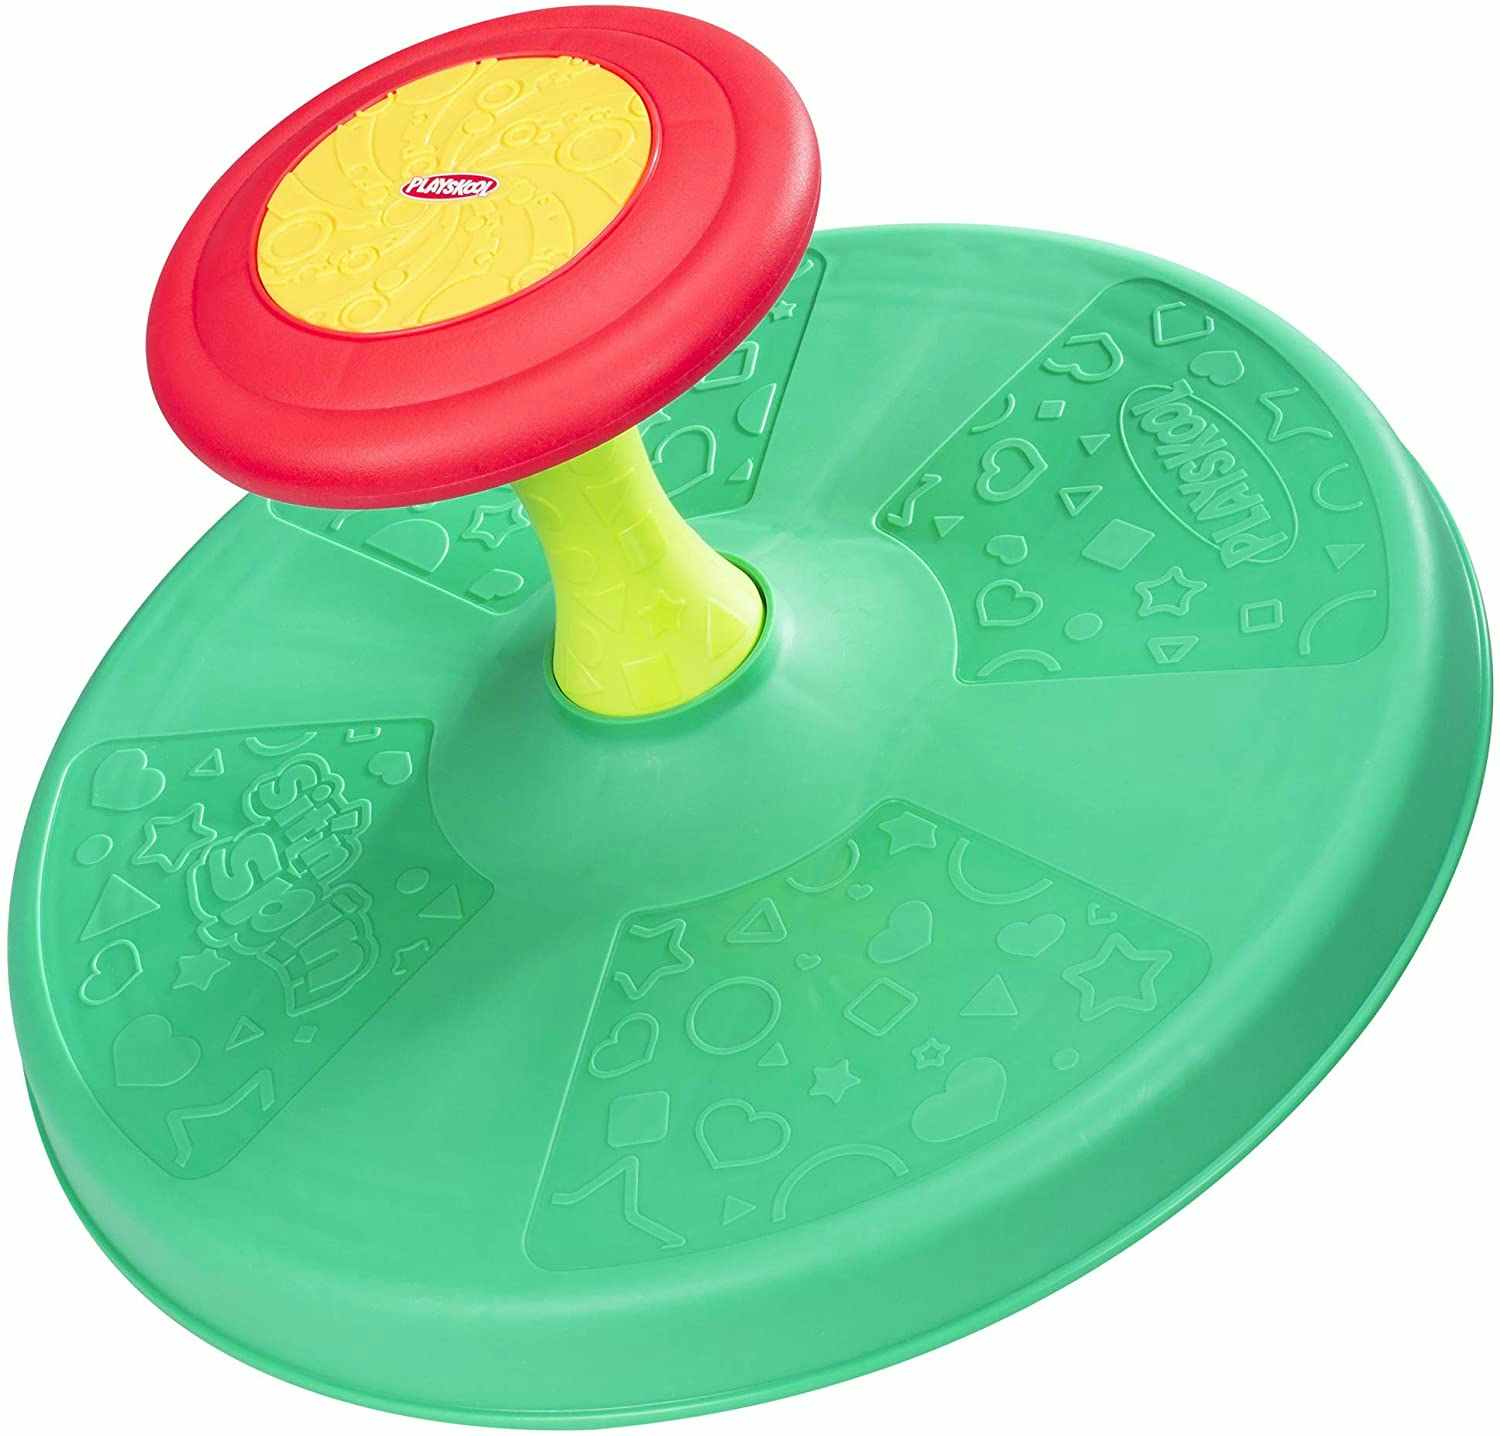 gifts for 2 year olds - A Playskool Sit 'n Spin Activity Toy on a white background.